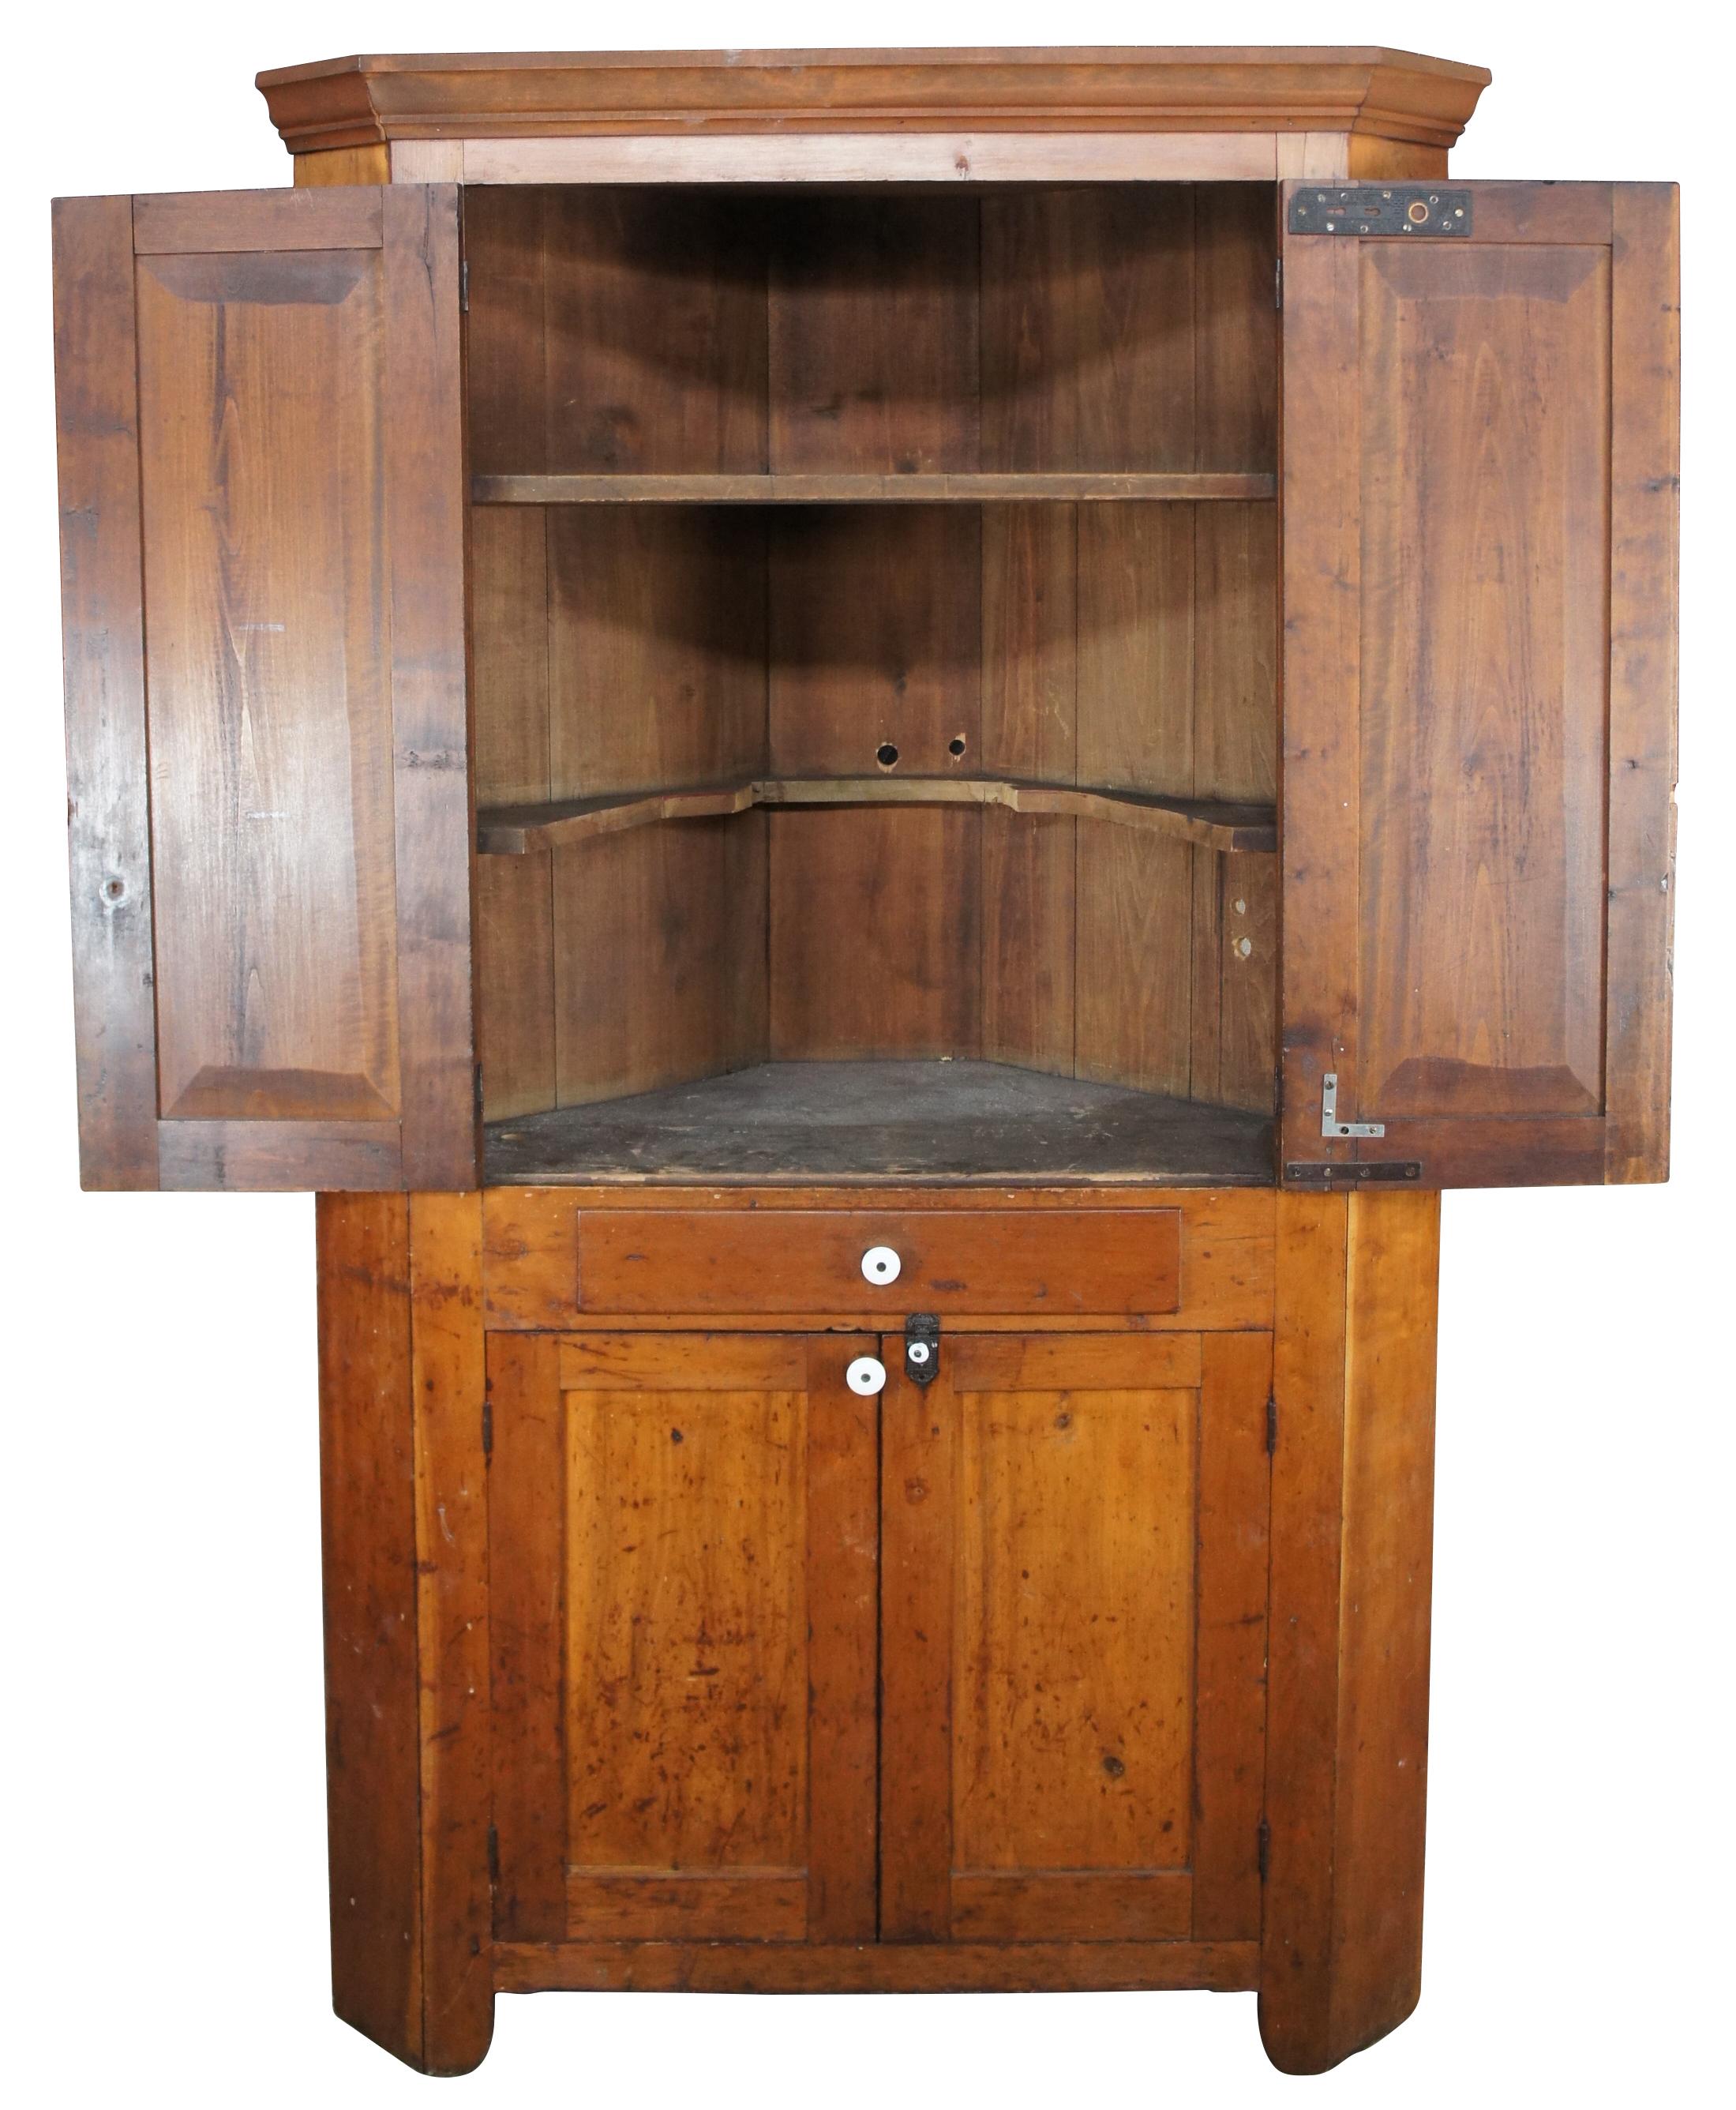 Rustic American corner cupboard, circa 1870s. Made from maple and constructed using hand cut nails. Features a warm patina with distressing from age. Hardware is iron and porcelain. 

Measures: 24